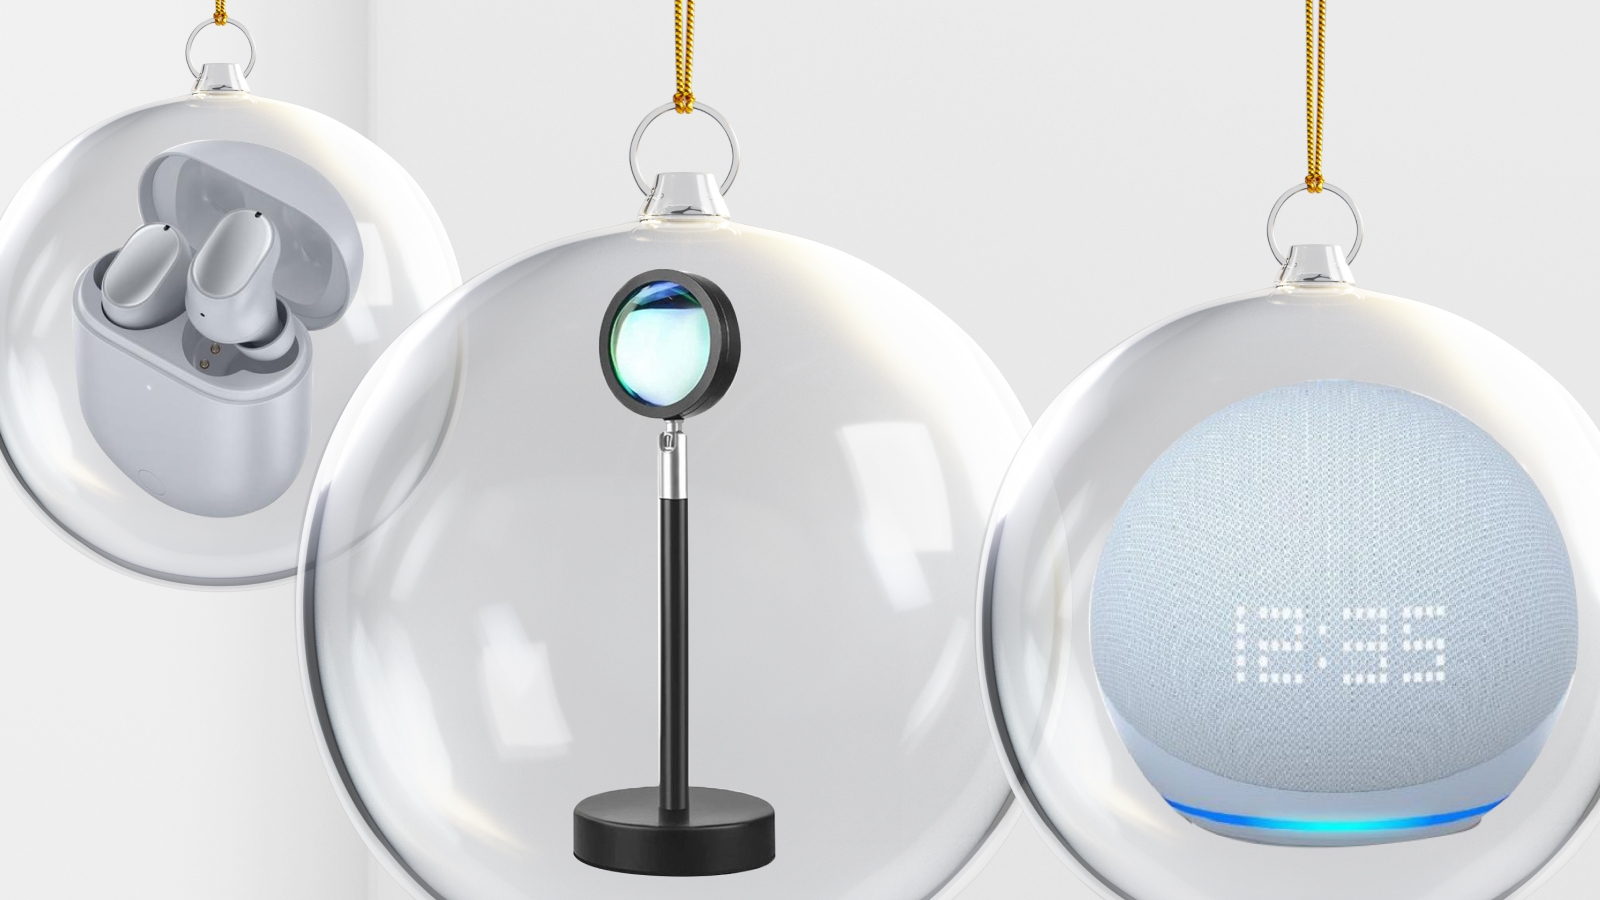 Tech gifts hanging in Christmas baubles